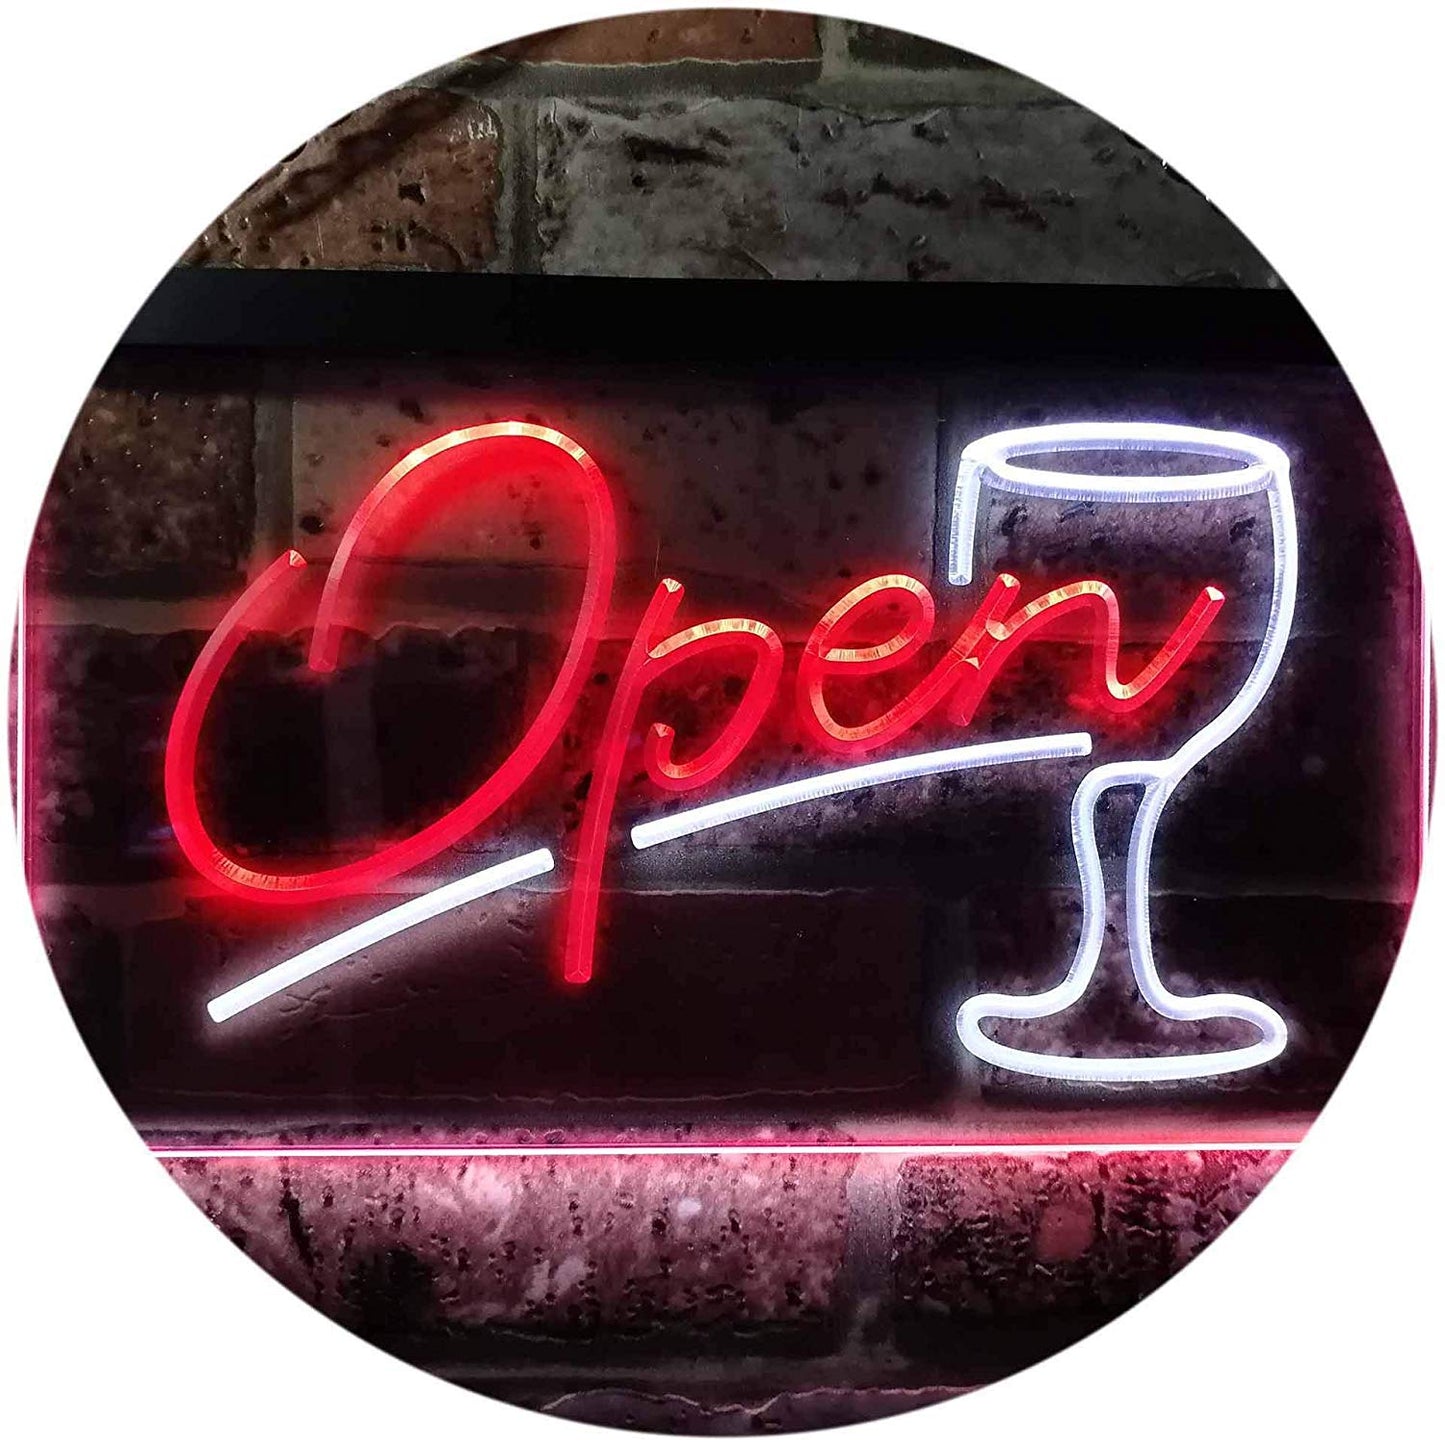 Open Wine Bar LED Neon Light Sign - Way Up Gifts